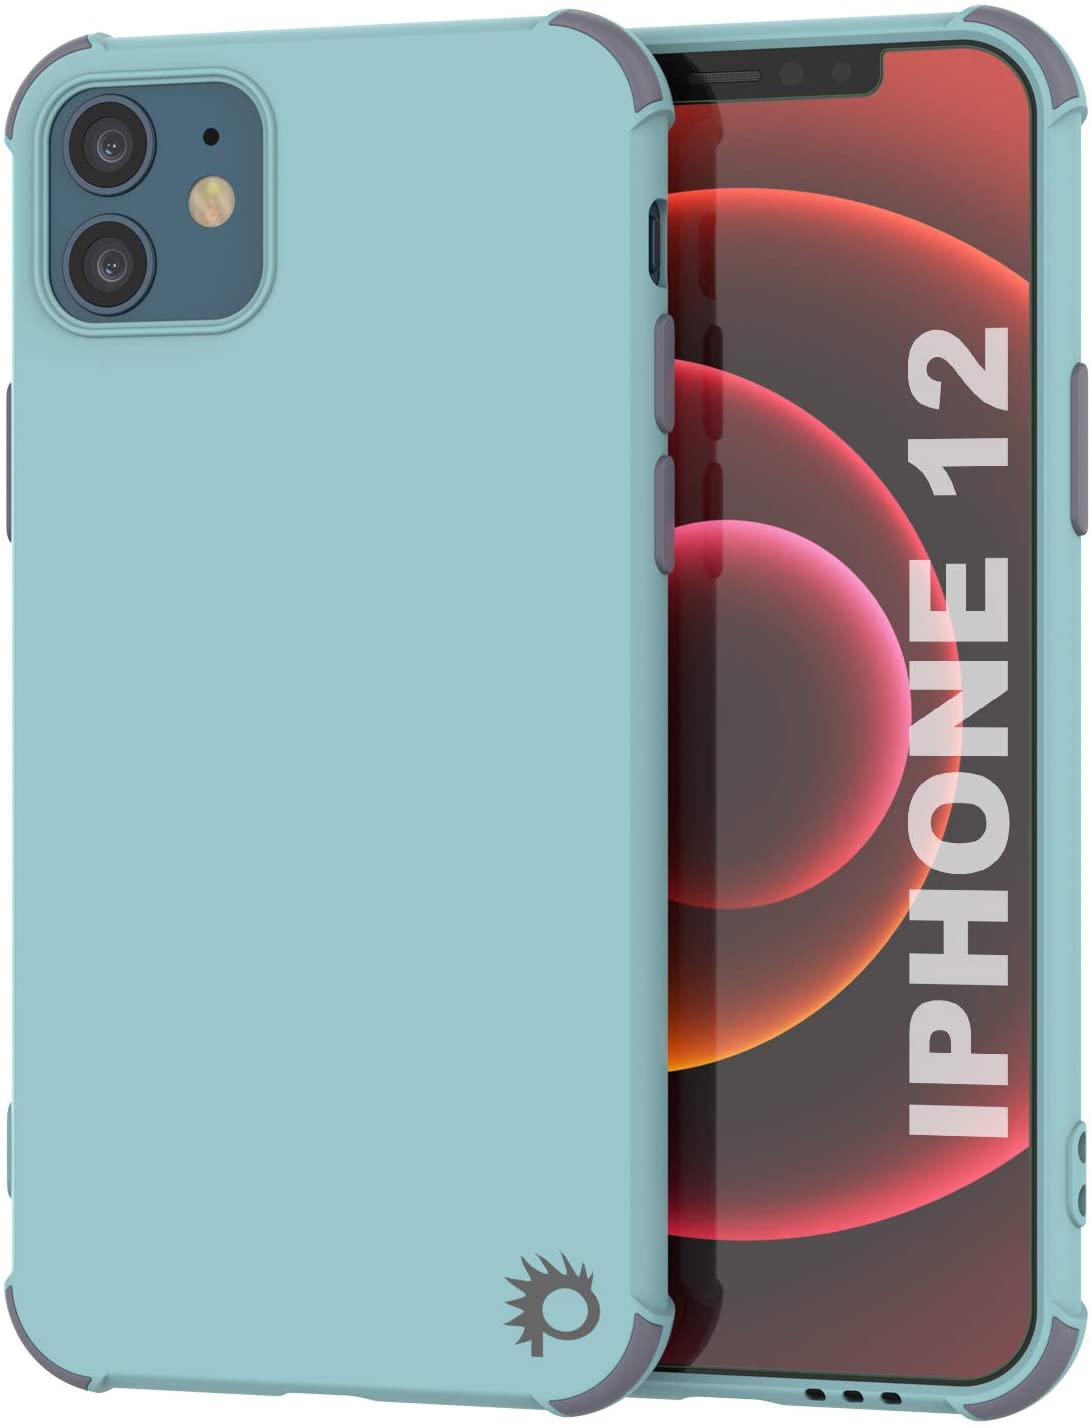 Punkcase Protective & Lightweight TPU Case [Sunshine Series] for iPhone 12 [Teal] (Color in image: Teal)